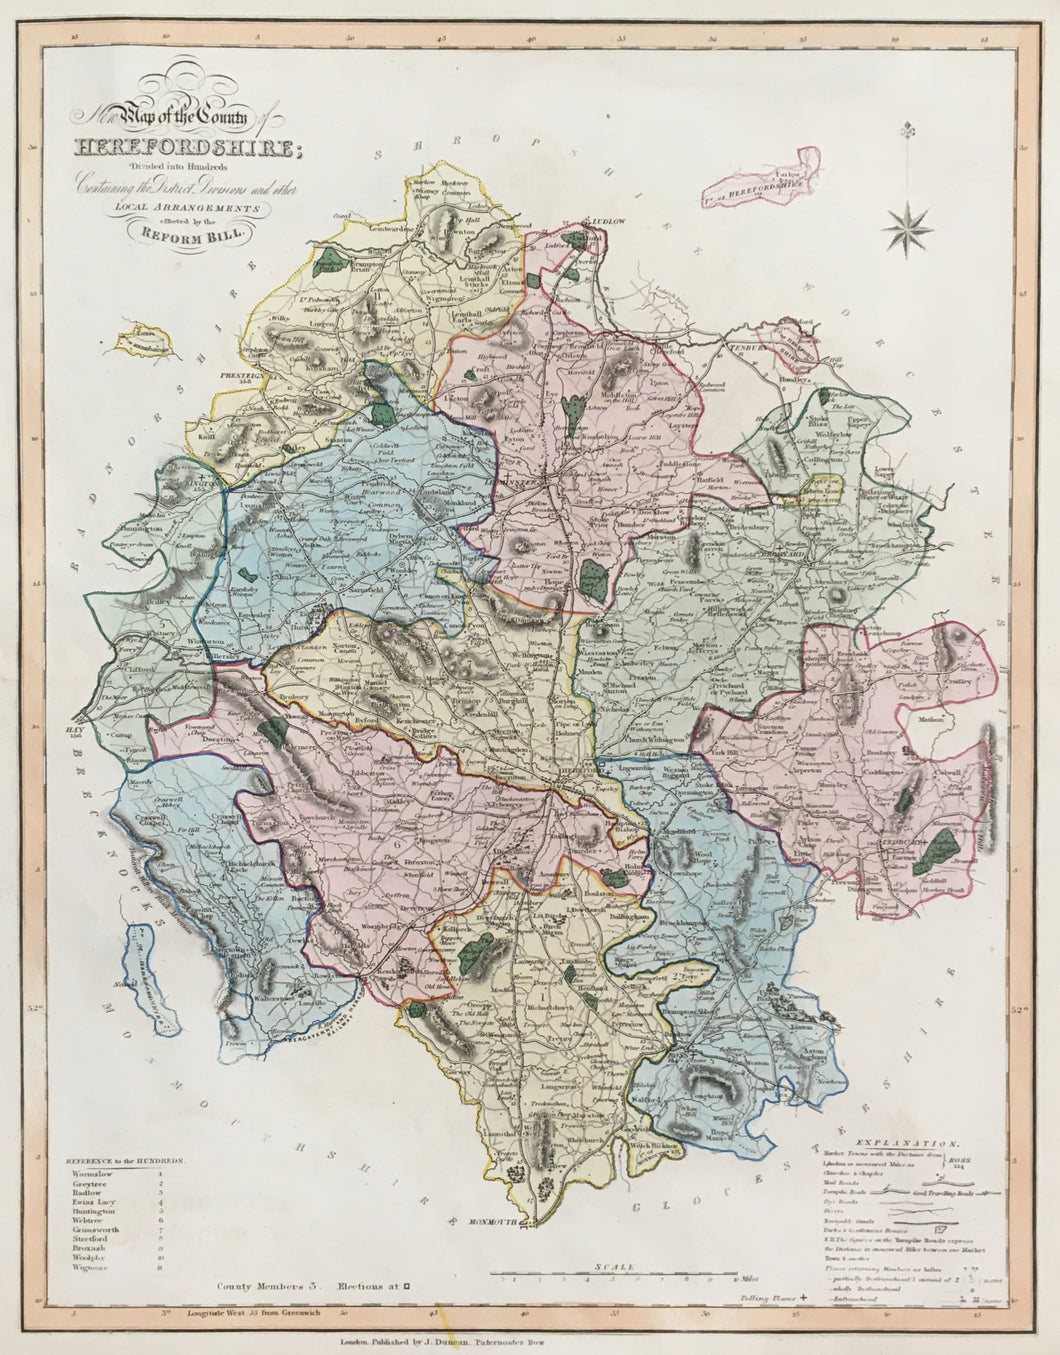 Ebden, William “New Map of the County of Herefordshire.”